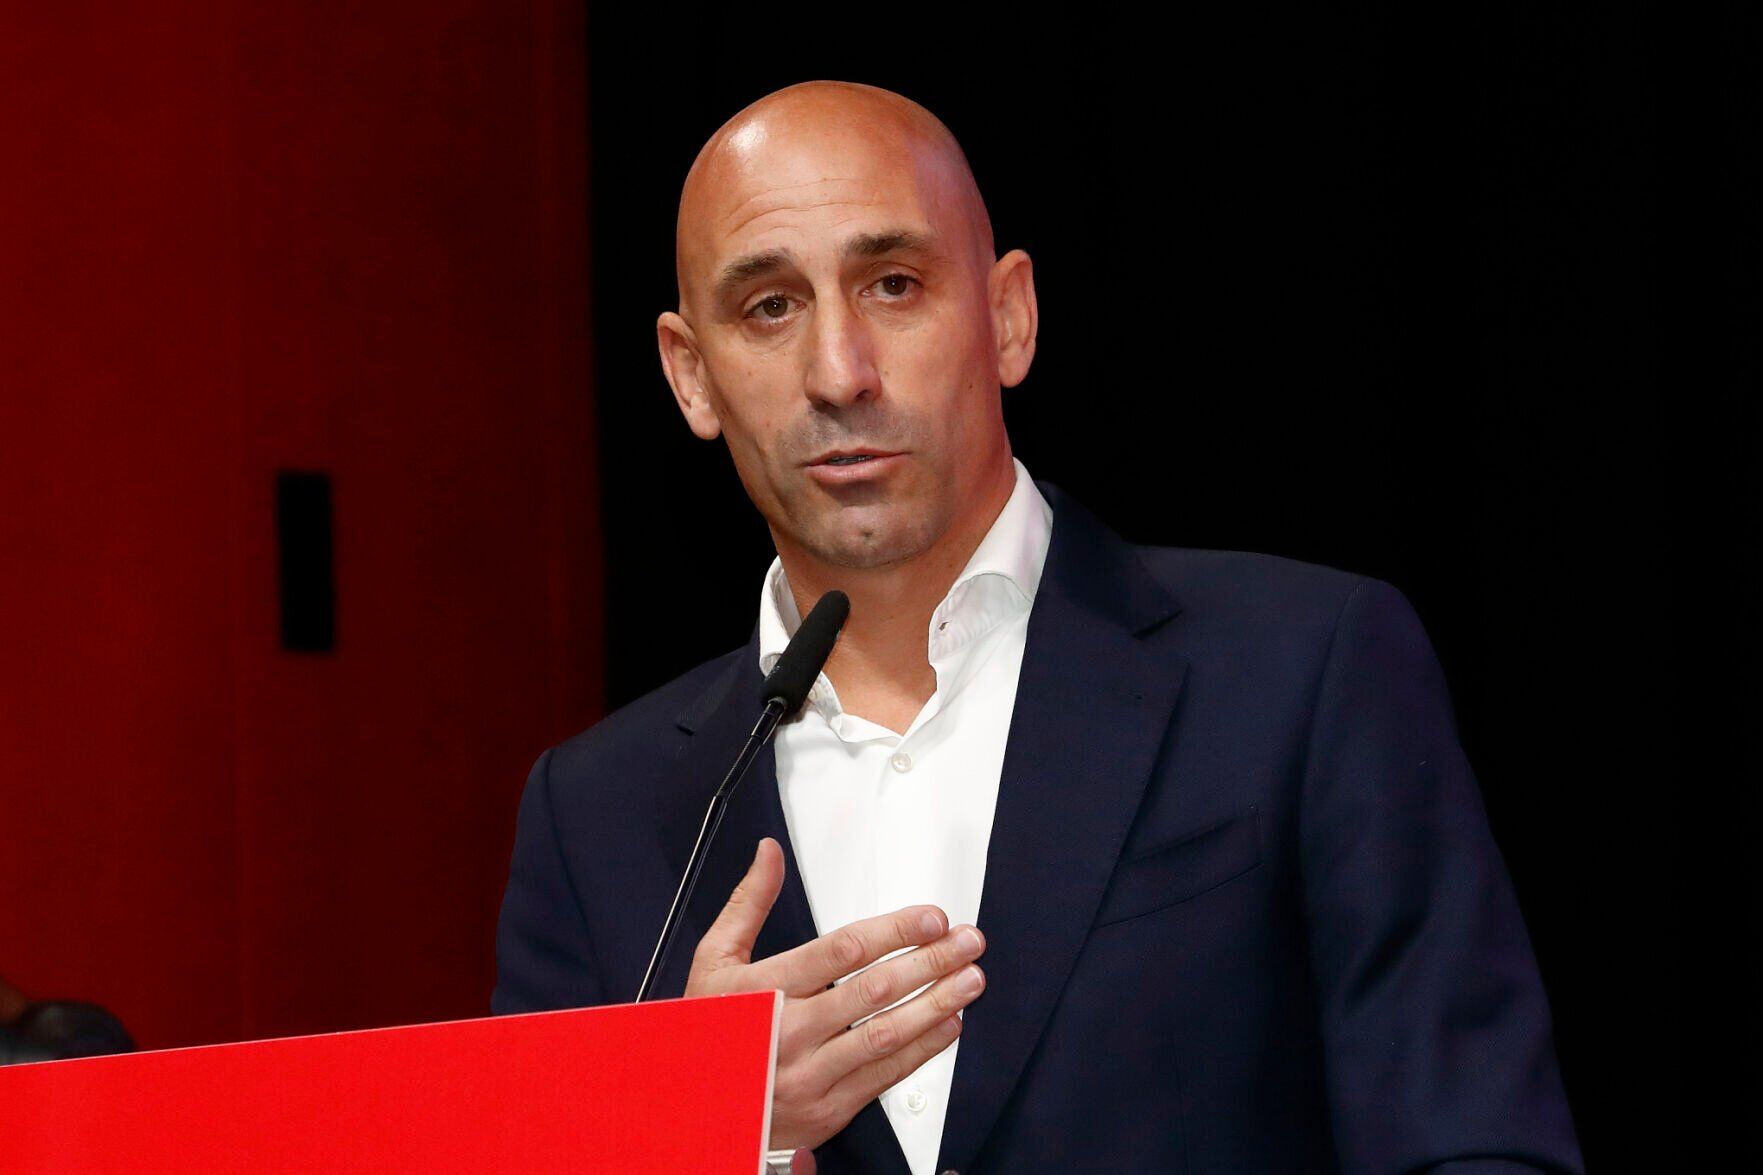 Rubiales resigns after kiss scandal at World pic picture